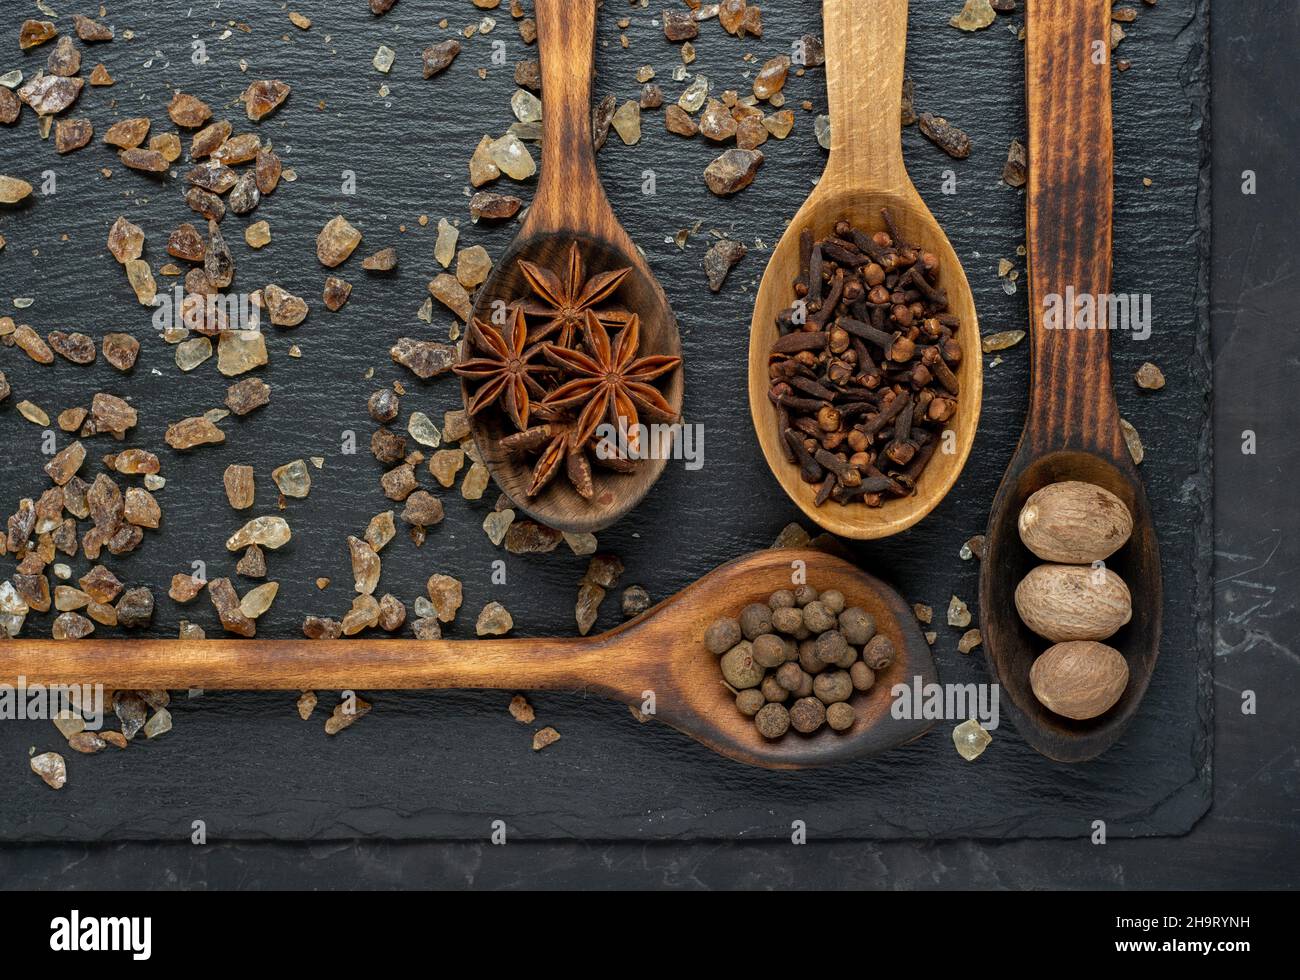 Mix of spices nutmeg, cinnamon, star anise, cloves and cardamom on dark slate background. Flat lay or top view Stock Photo